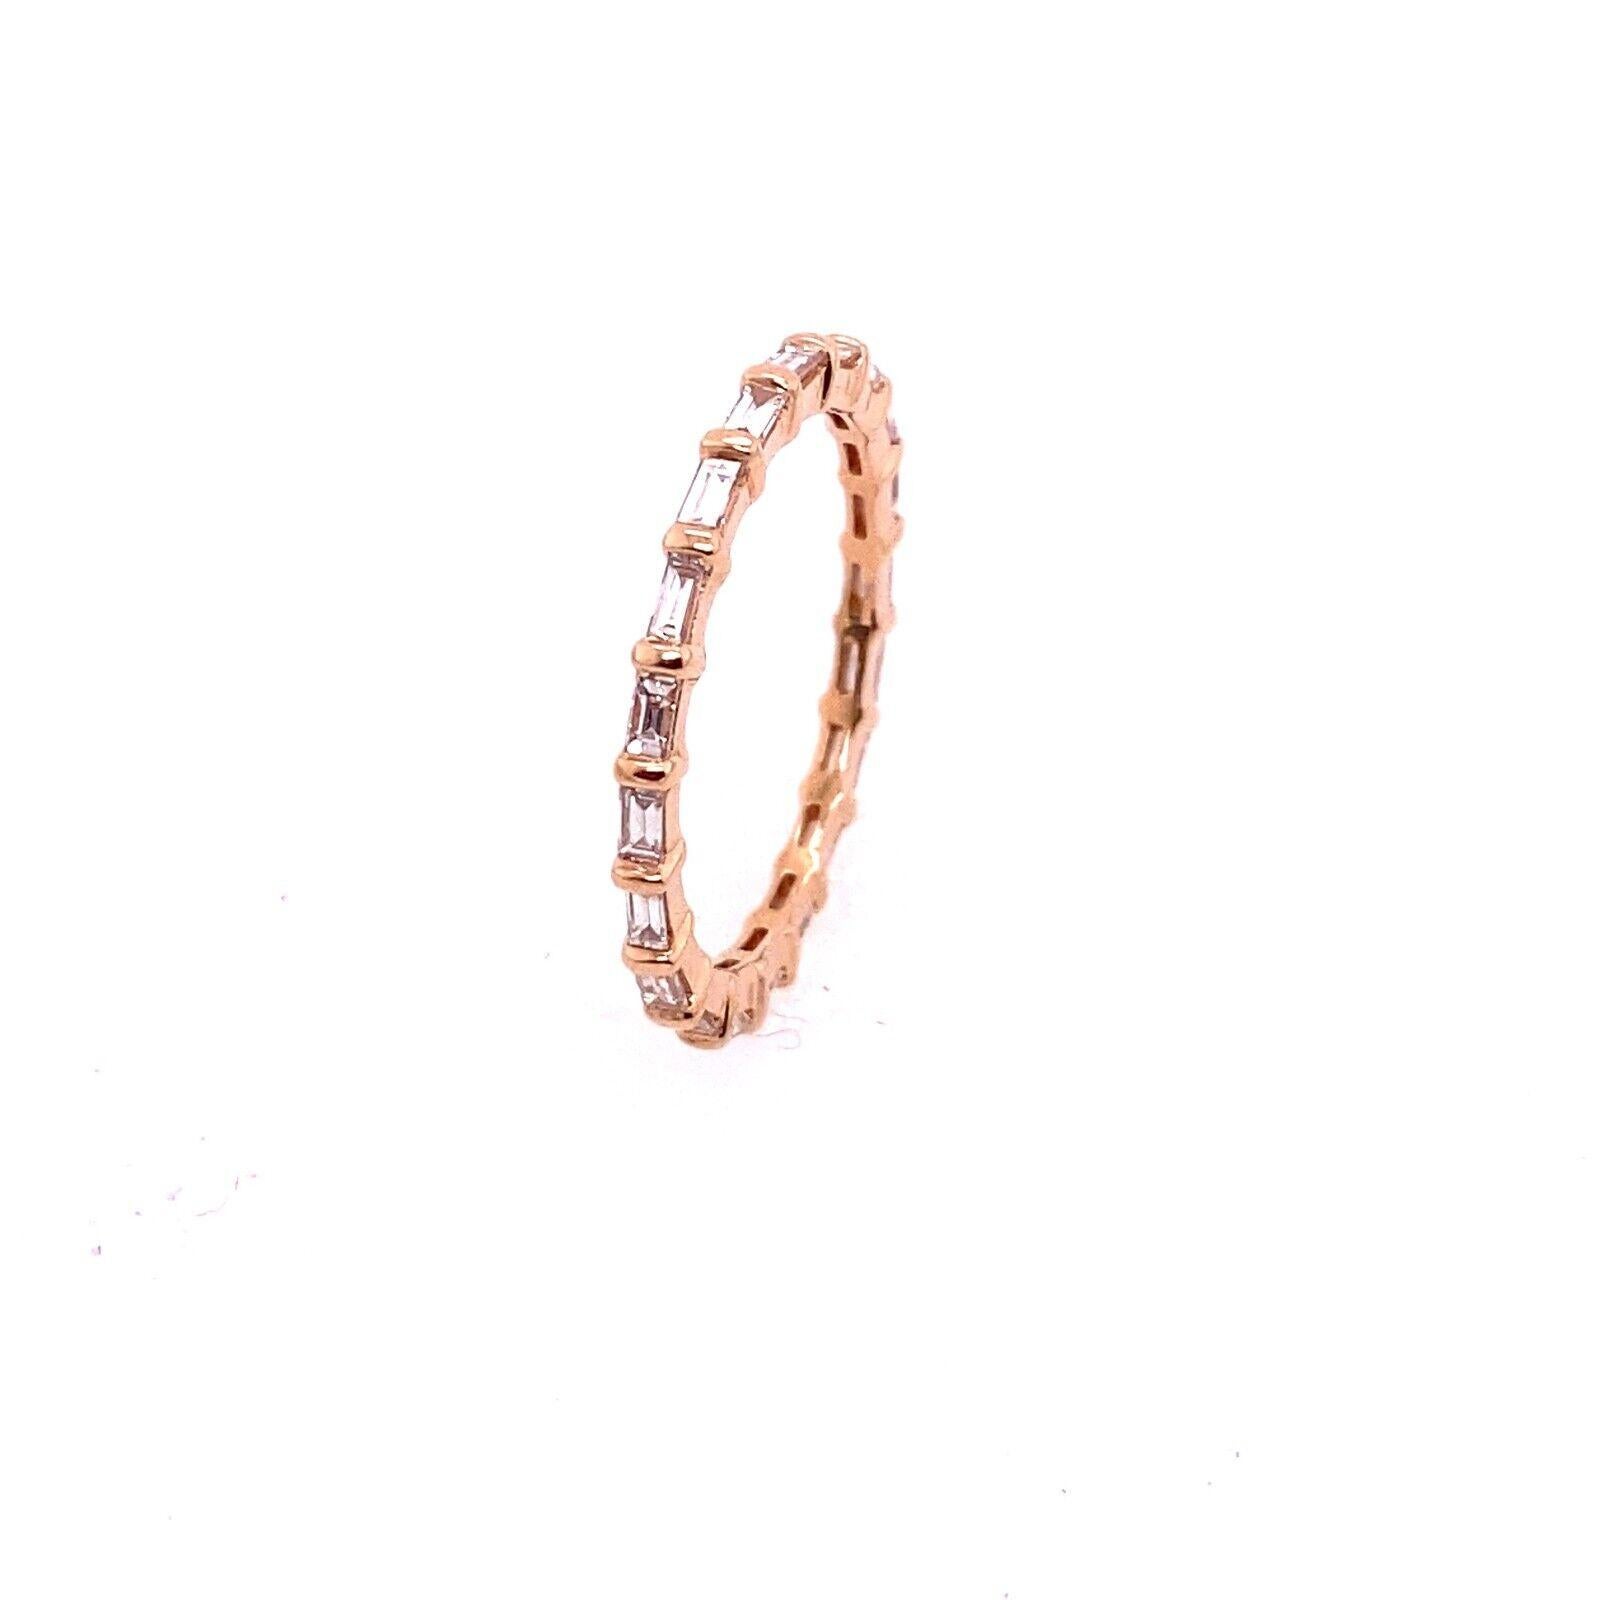 0.70t Baguette Diamond Full Eternity Ring in 14ct Rose Gold

This stunning 14ct Rose Gold eternity ring is a single row of baguette Diamonds in a full eternity band. The 0.70ct total Diamond weight makes this a great choice for a wedding band when